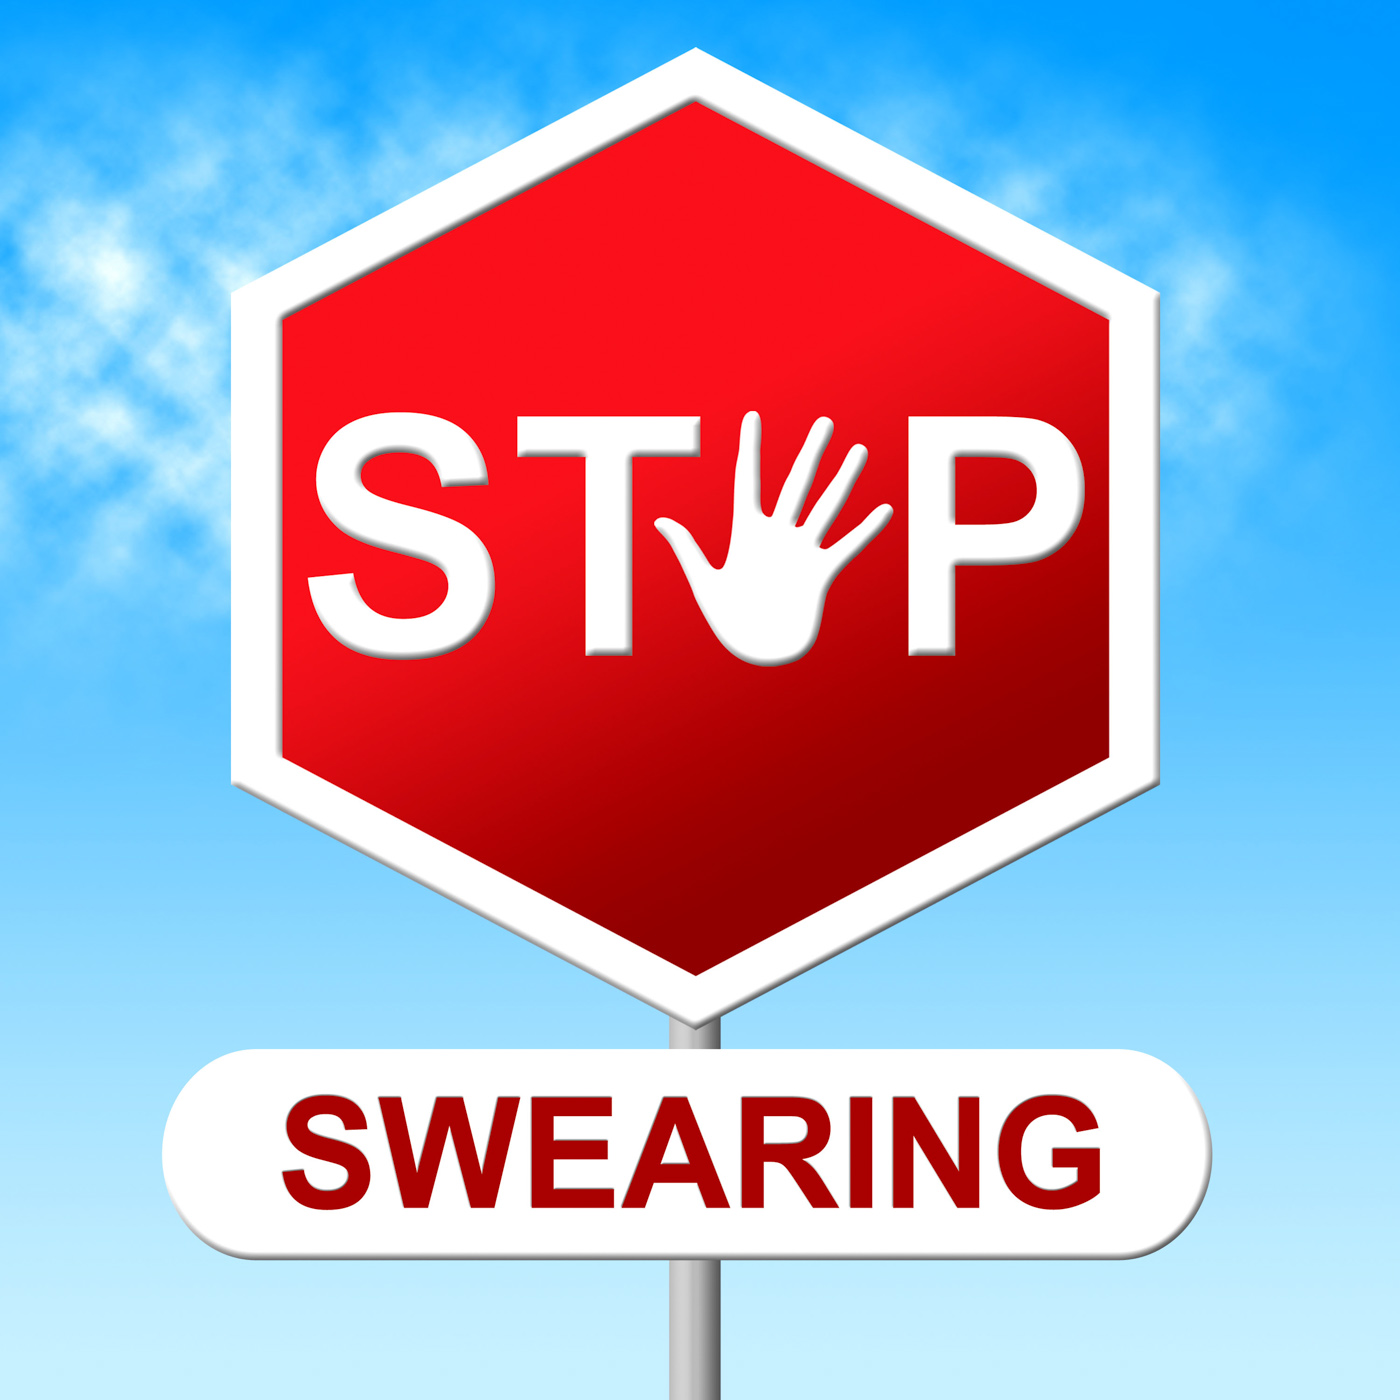 Swearing Stop Indicates Bad Words And Control, Abuse, Prohibit, Warning, Swearing, HQ Photo